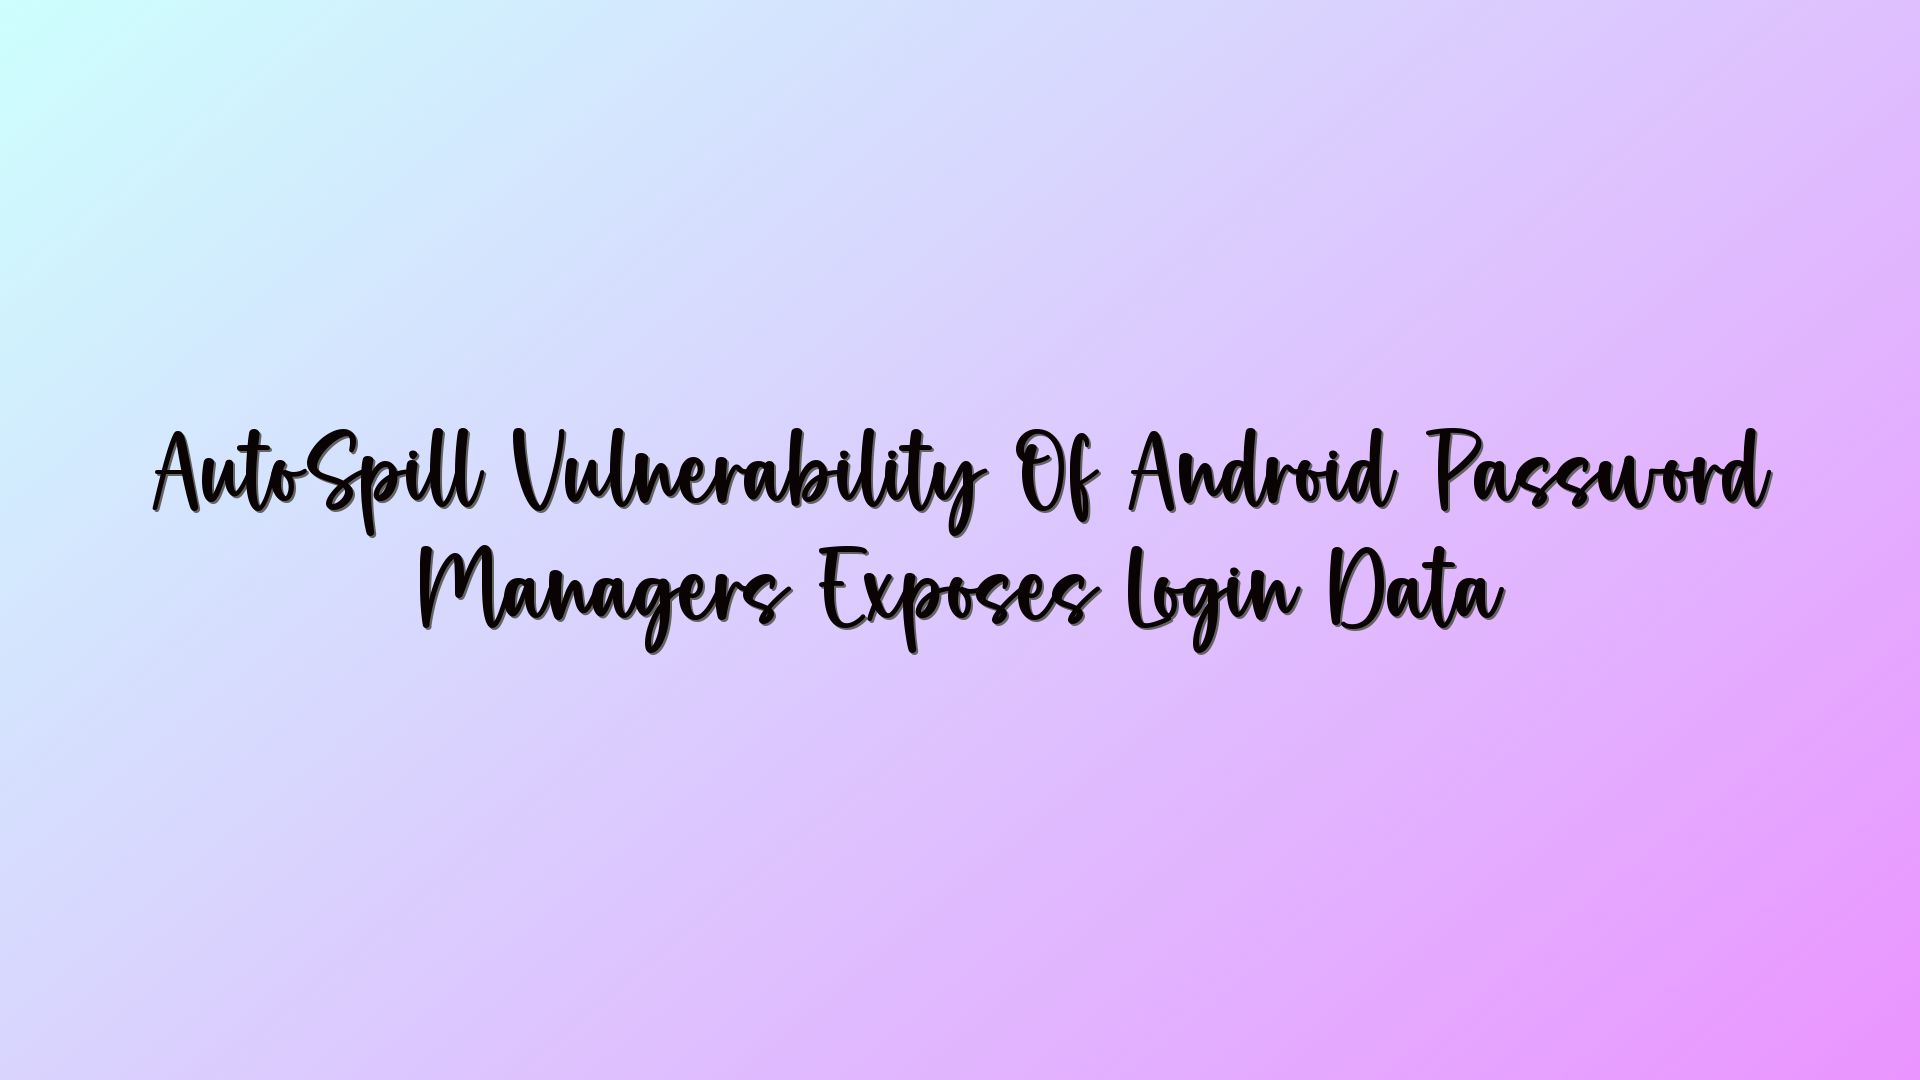 AutoSpill Vulnerability Of Android Password Managers Exposes Login Data